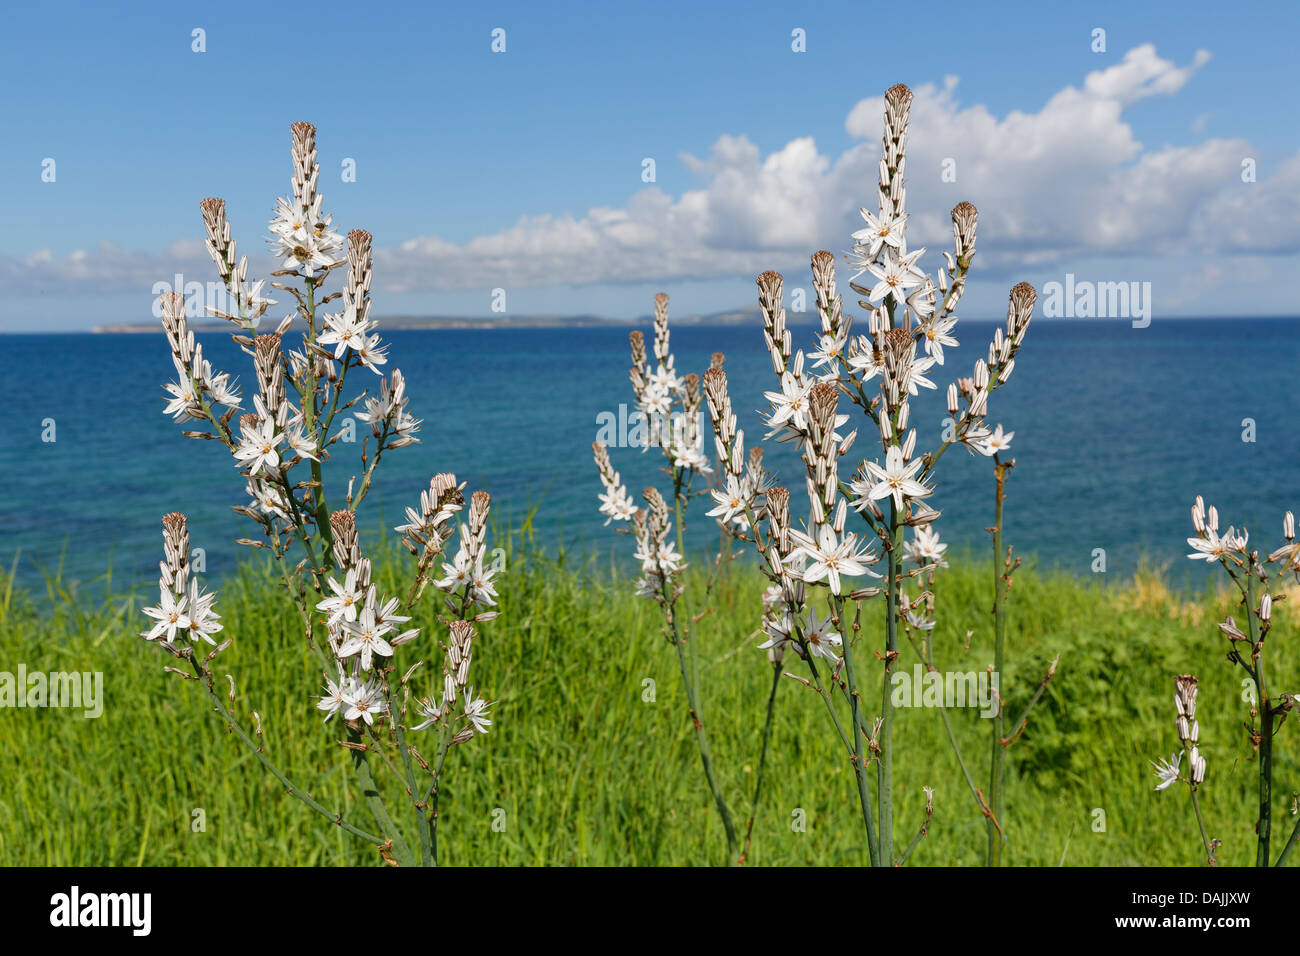 Turkey, View of Branched asphodel Stock Photo